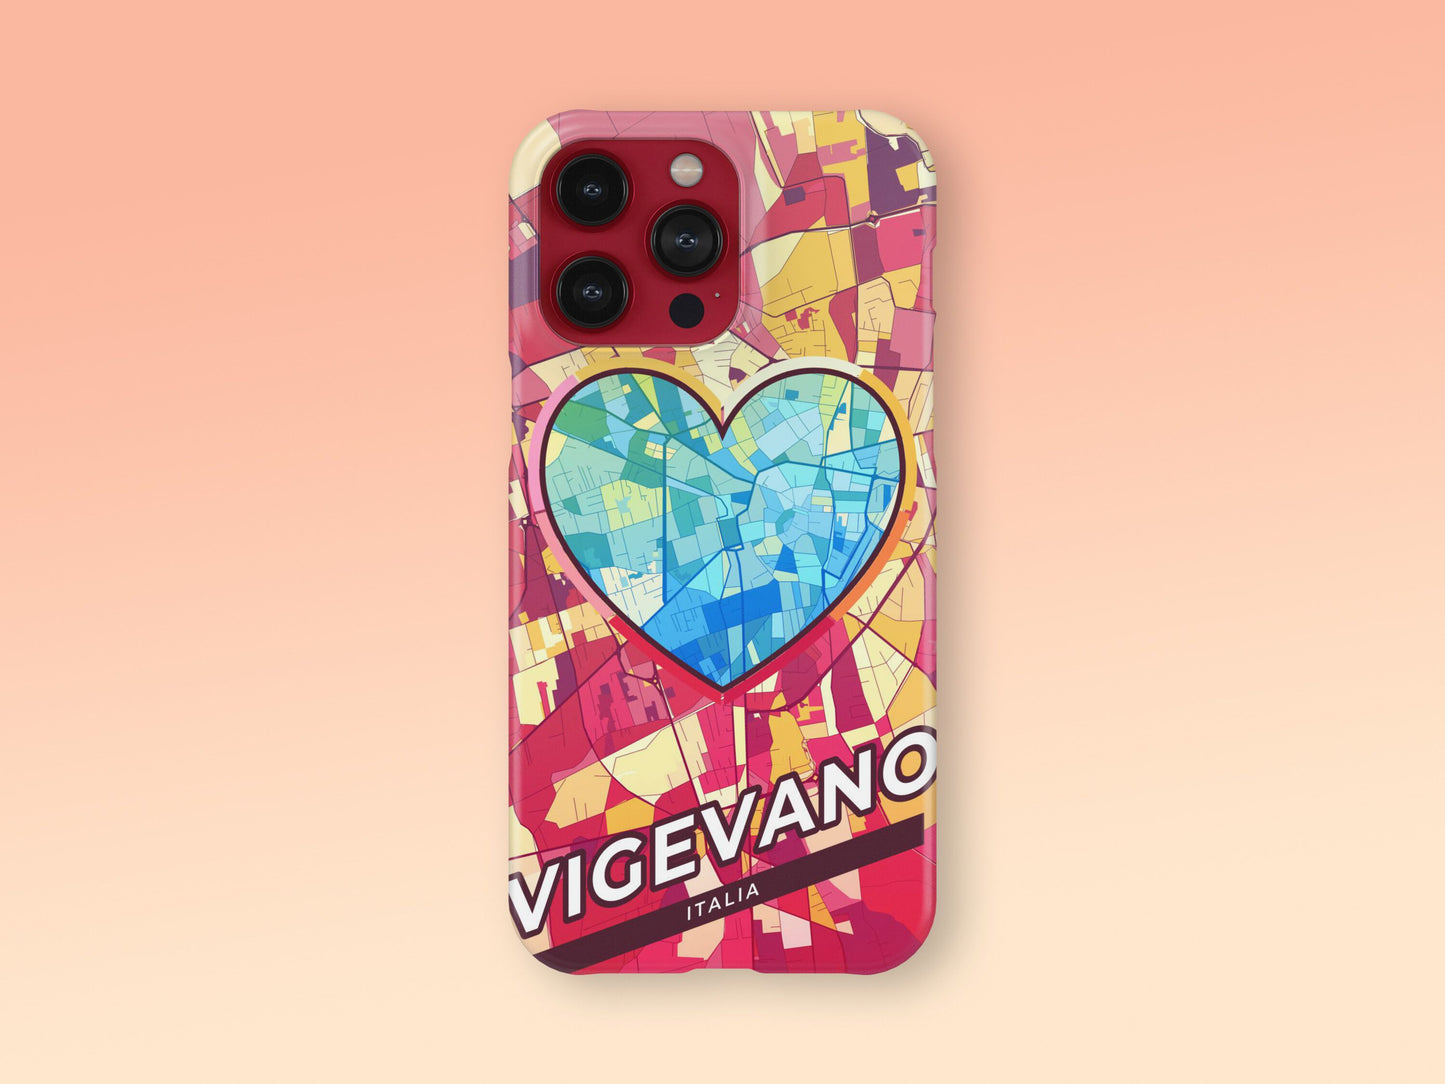 Vigevano Italy slim phone case with colorful icon 2